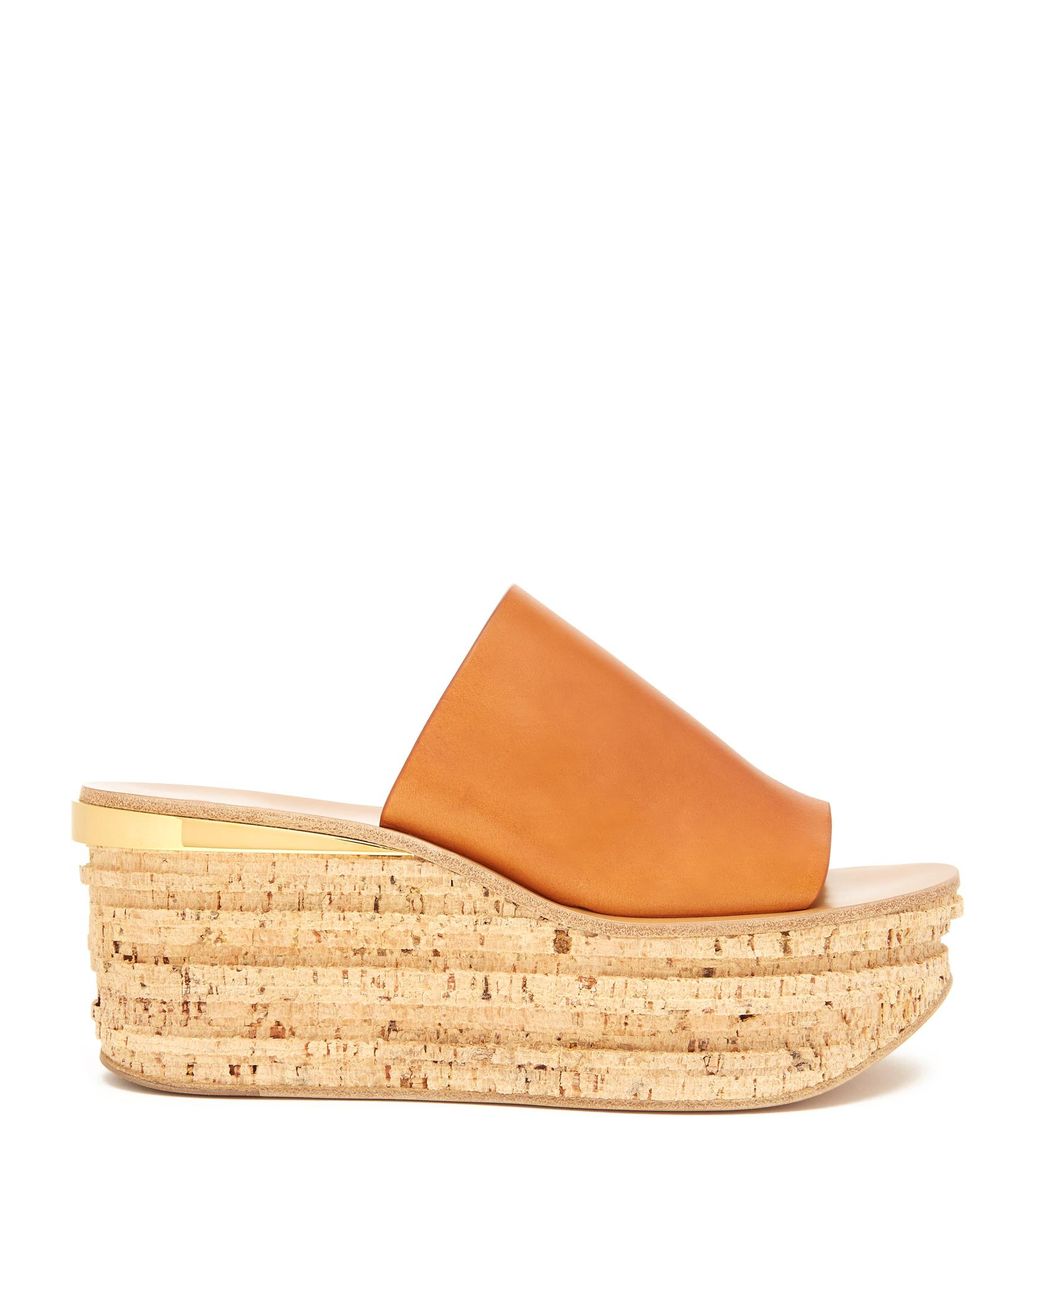 Chloé Women's Brown Camille Leather Wedge Mules